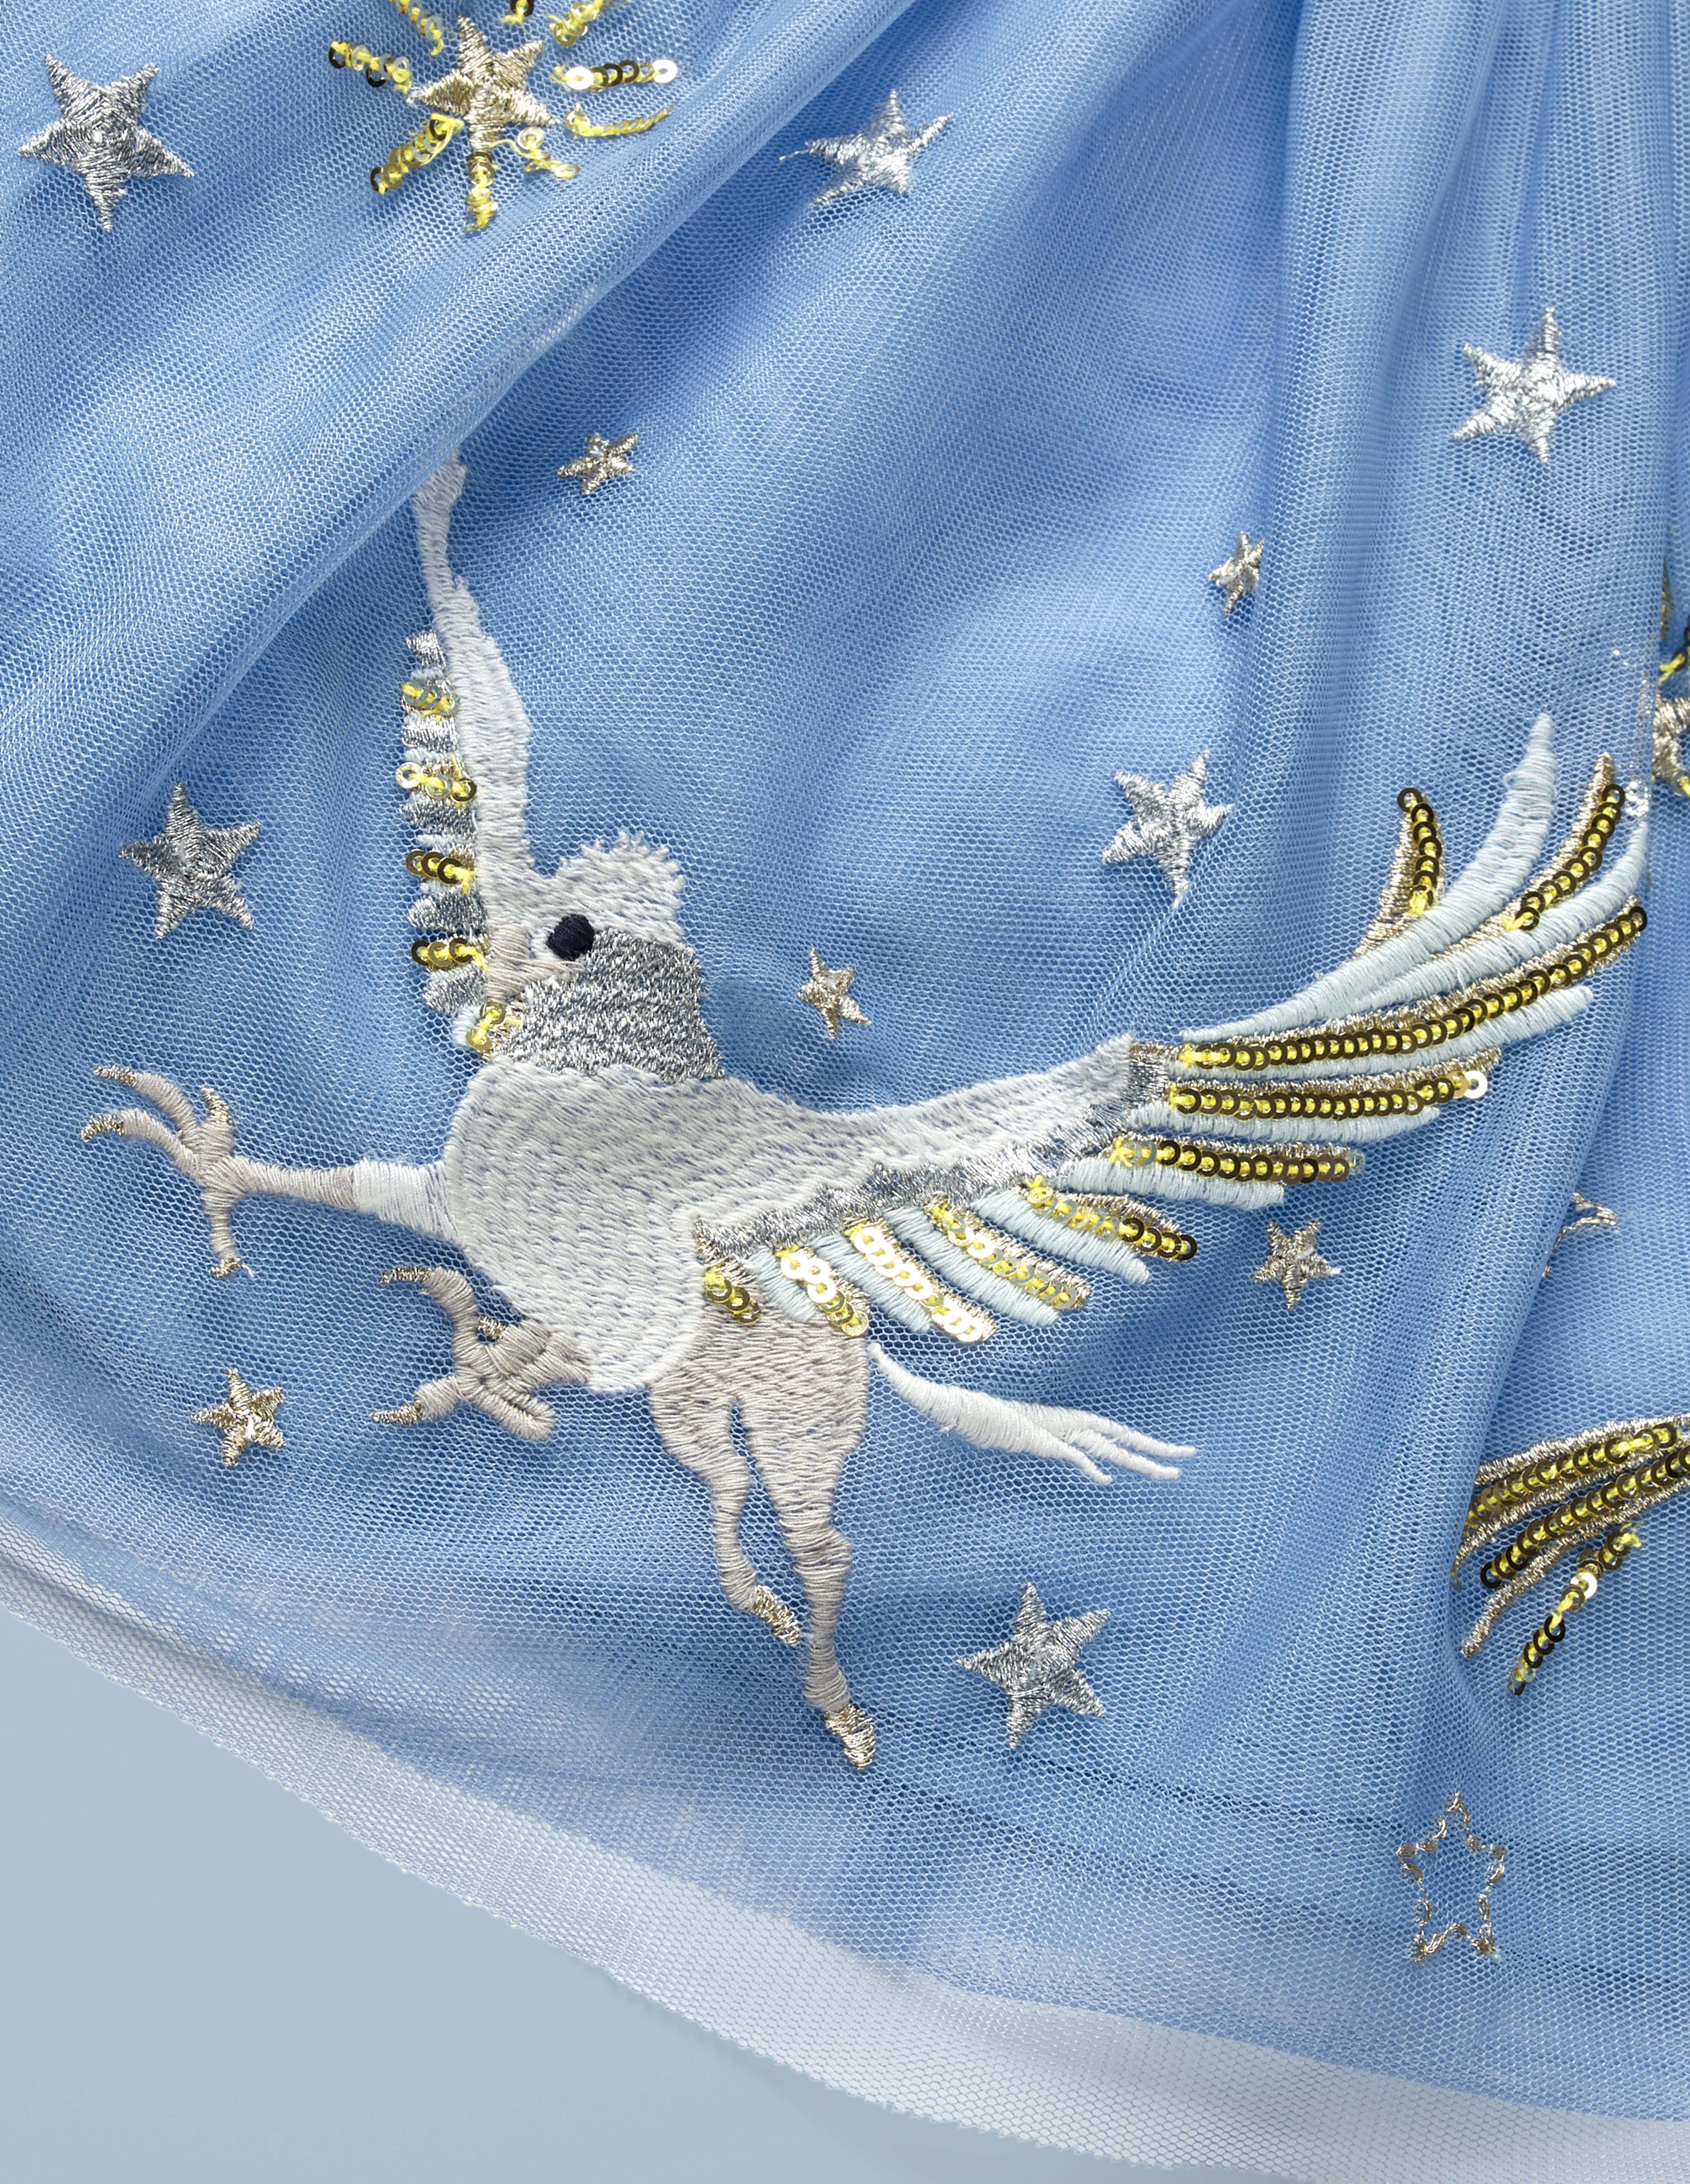 This close-up of the Mini Boden Hippogriff Tulle Skirt in light blue provides a better look at the design: a hippogriff flying among the stars. It retails at £40.